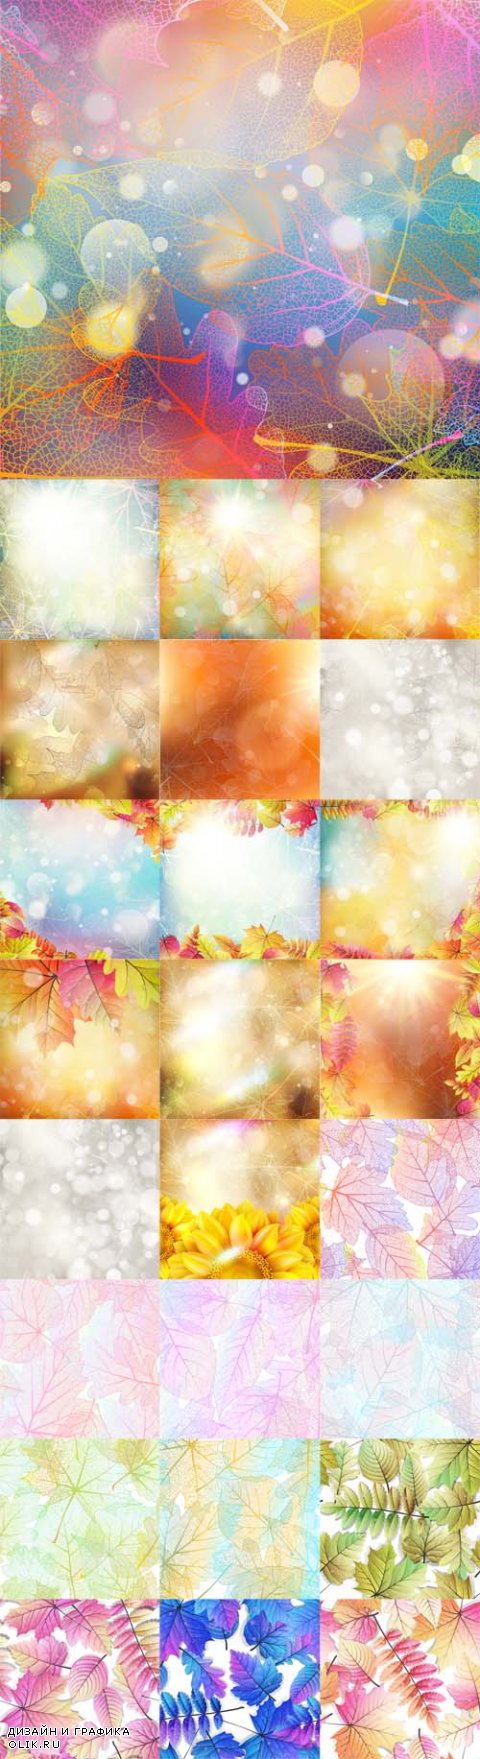 Vector Beautiful Autumn Backgrounds with Sun